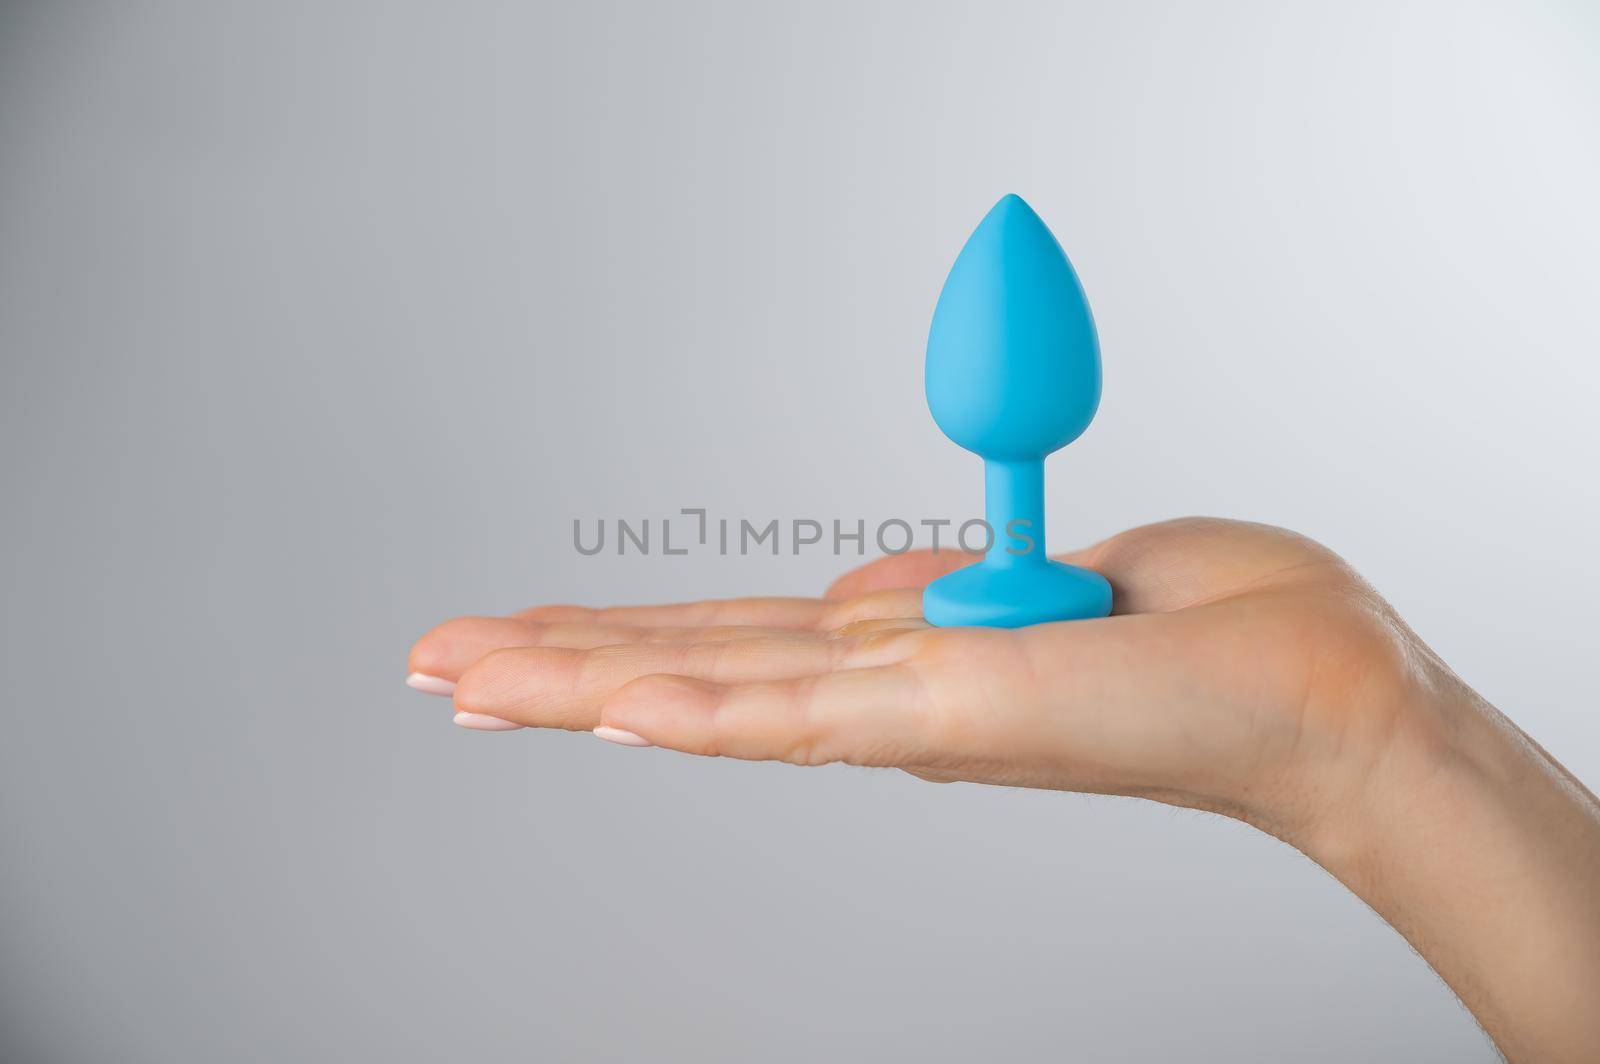 Woman holding a blue anal plug on a white background. Adult toy for alternative sex.